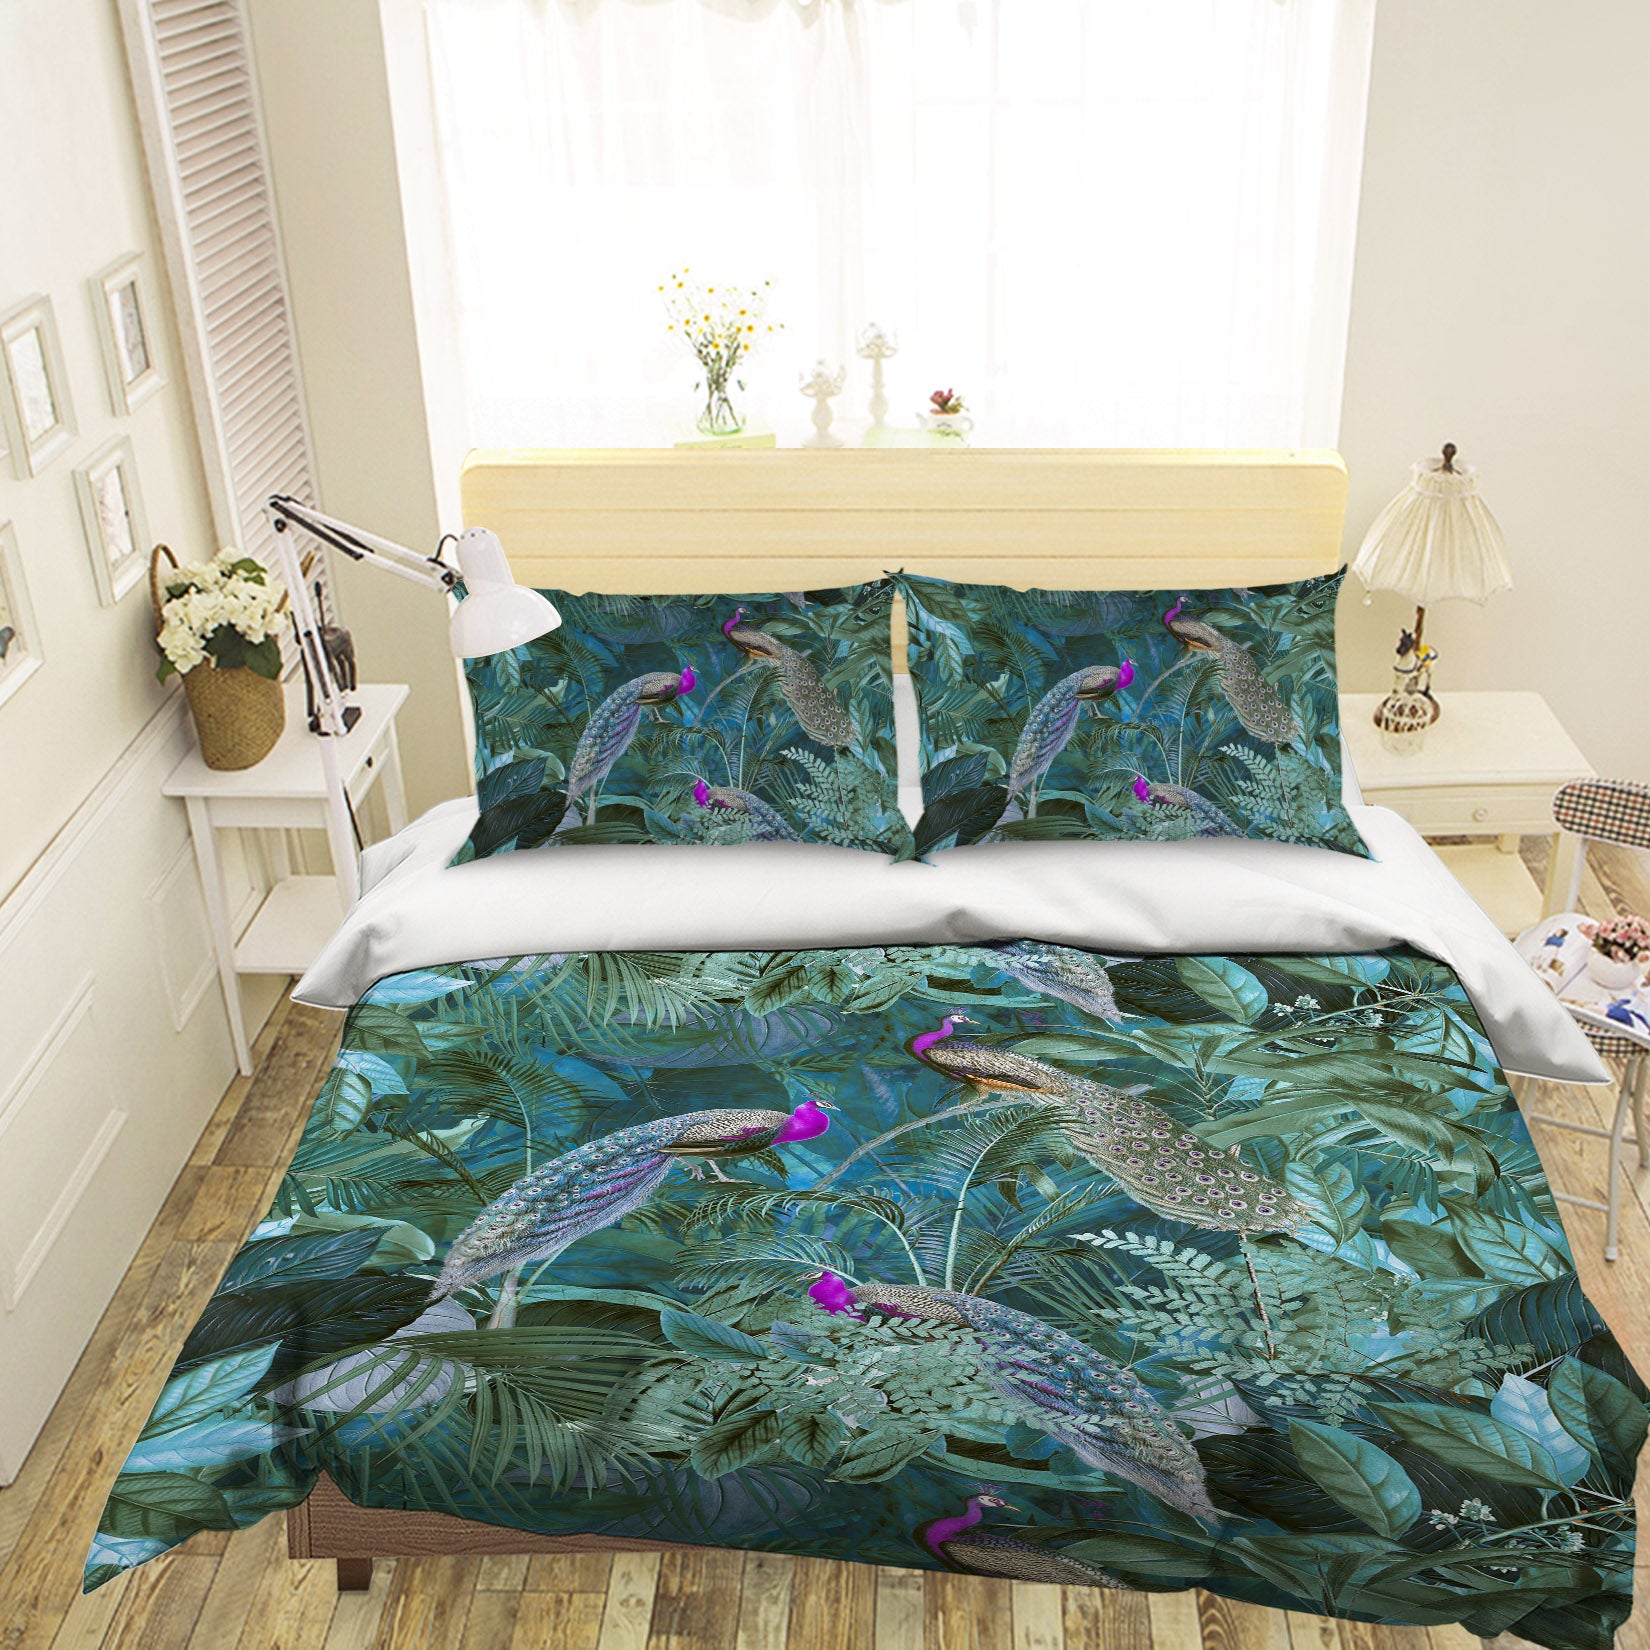 3D Forest Peacock 111 Andrea haase Bedding Bed Pillowcases Quilt